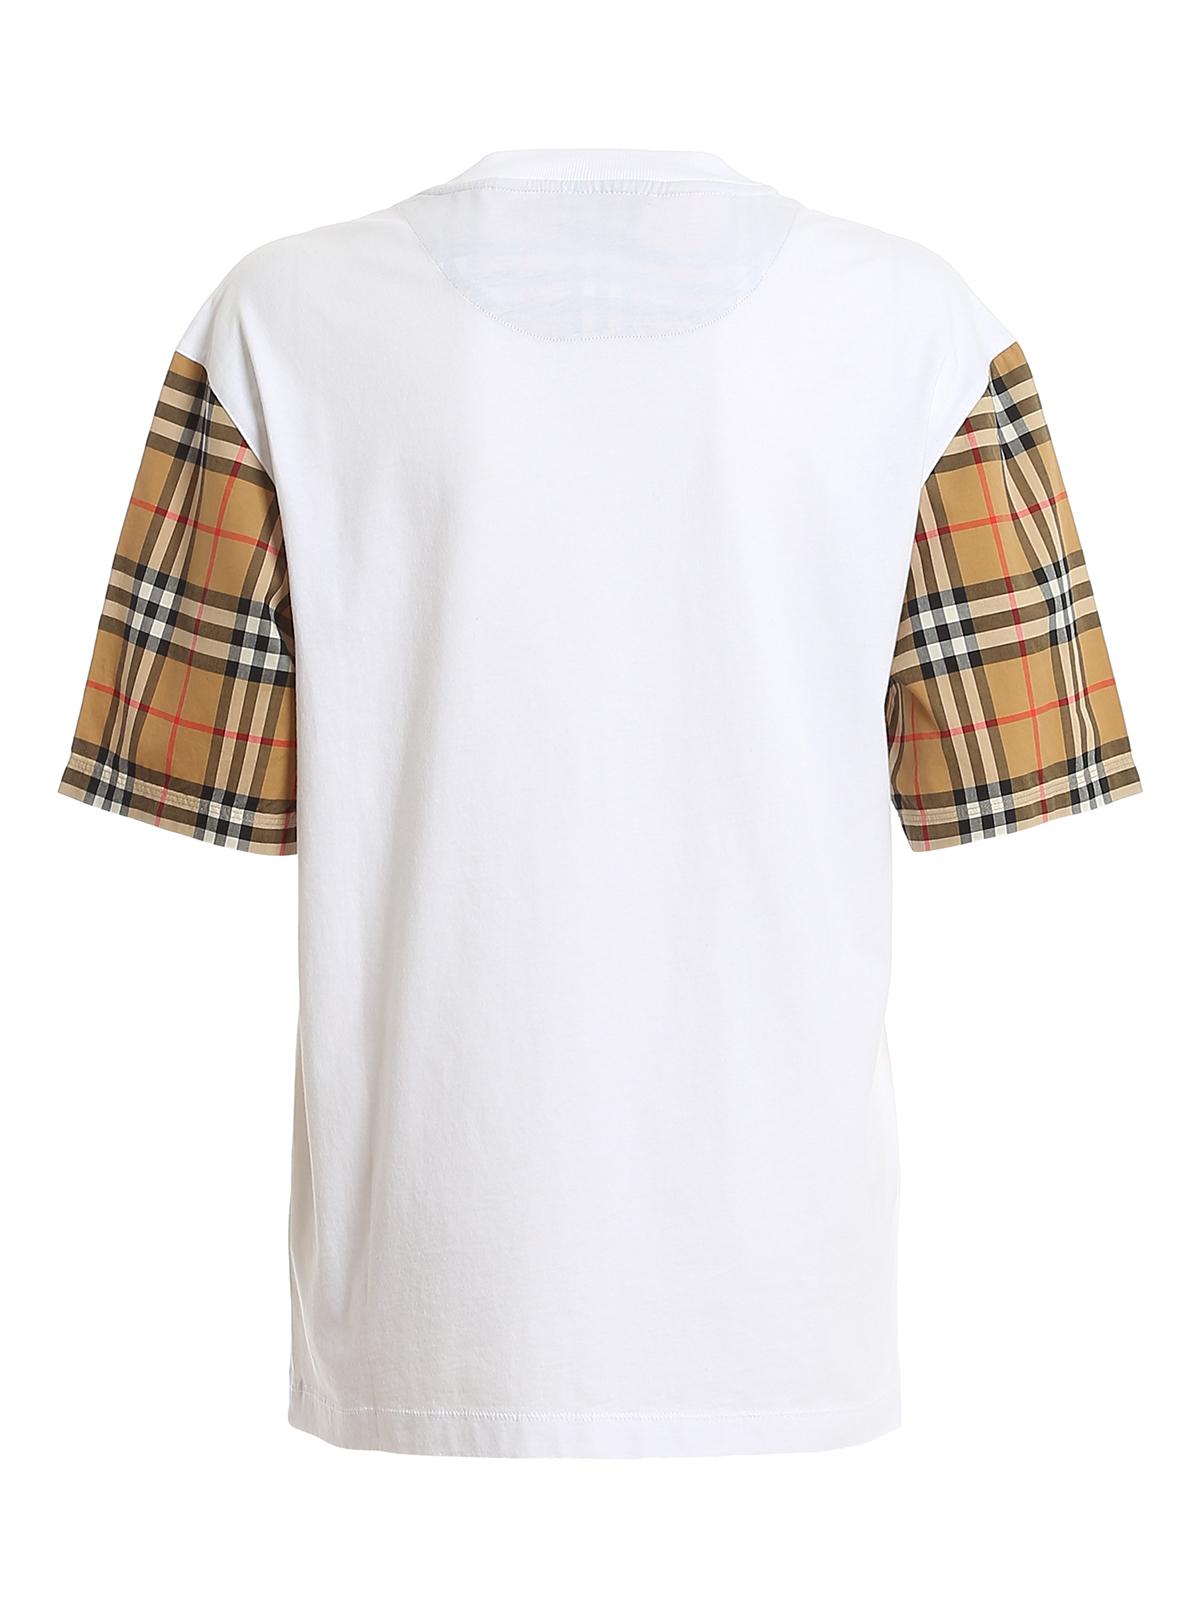 Burberry Serra Checked Cotton-jersey T-shirt in White - Save 50% - Lyst